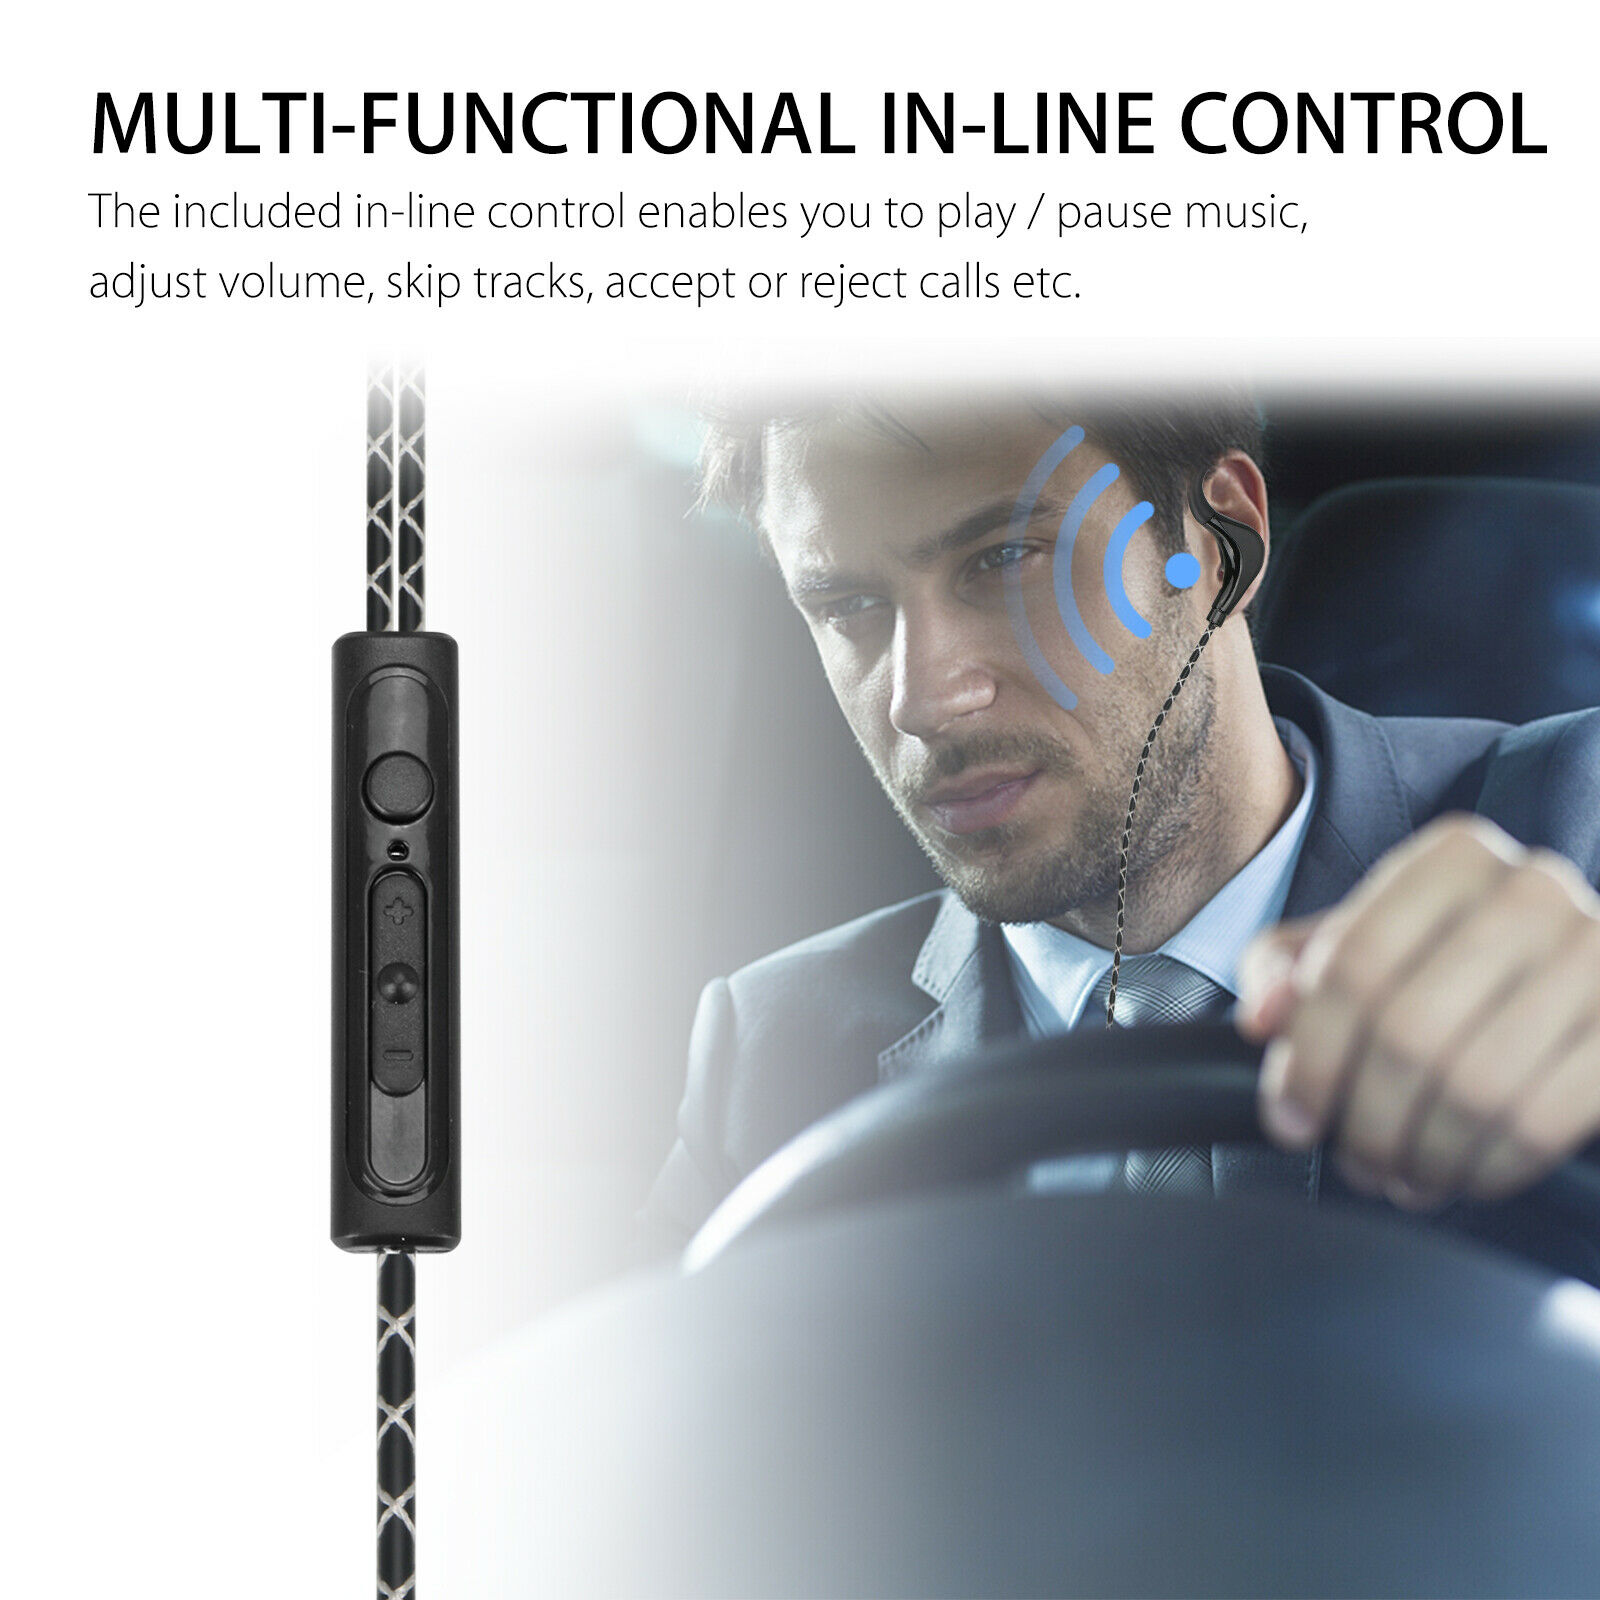 Wired Earbuds, Earbuds with Microphone and Volume Control, in Ear Ergonomic Noise Isolating Headphones, Earphones with 3.5mm Jack,Powerful Bass Sound - image 2 of 8